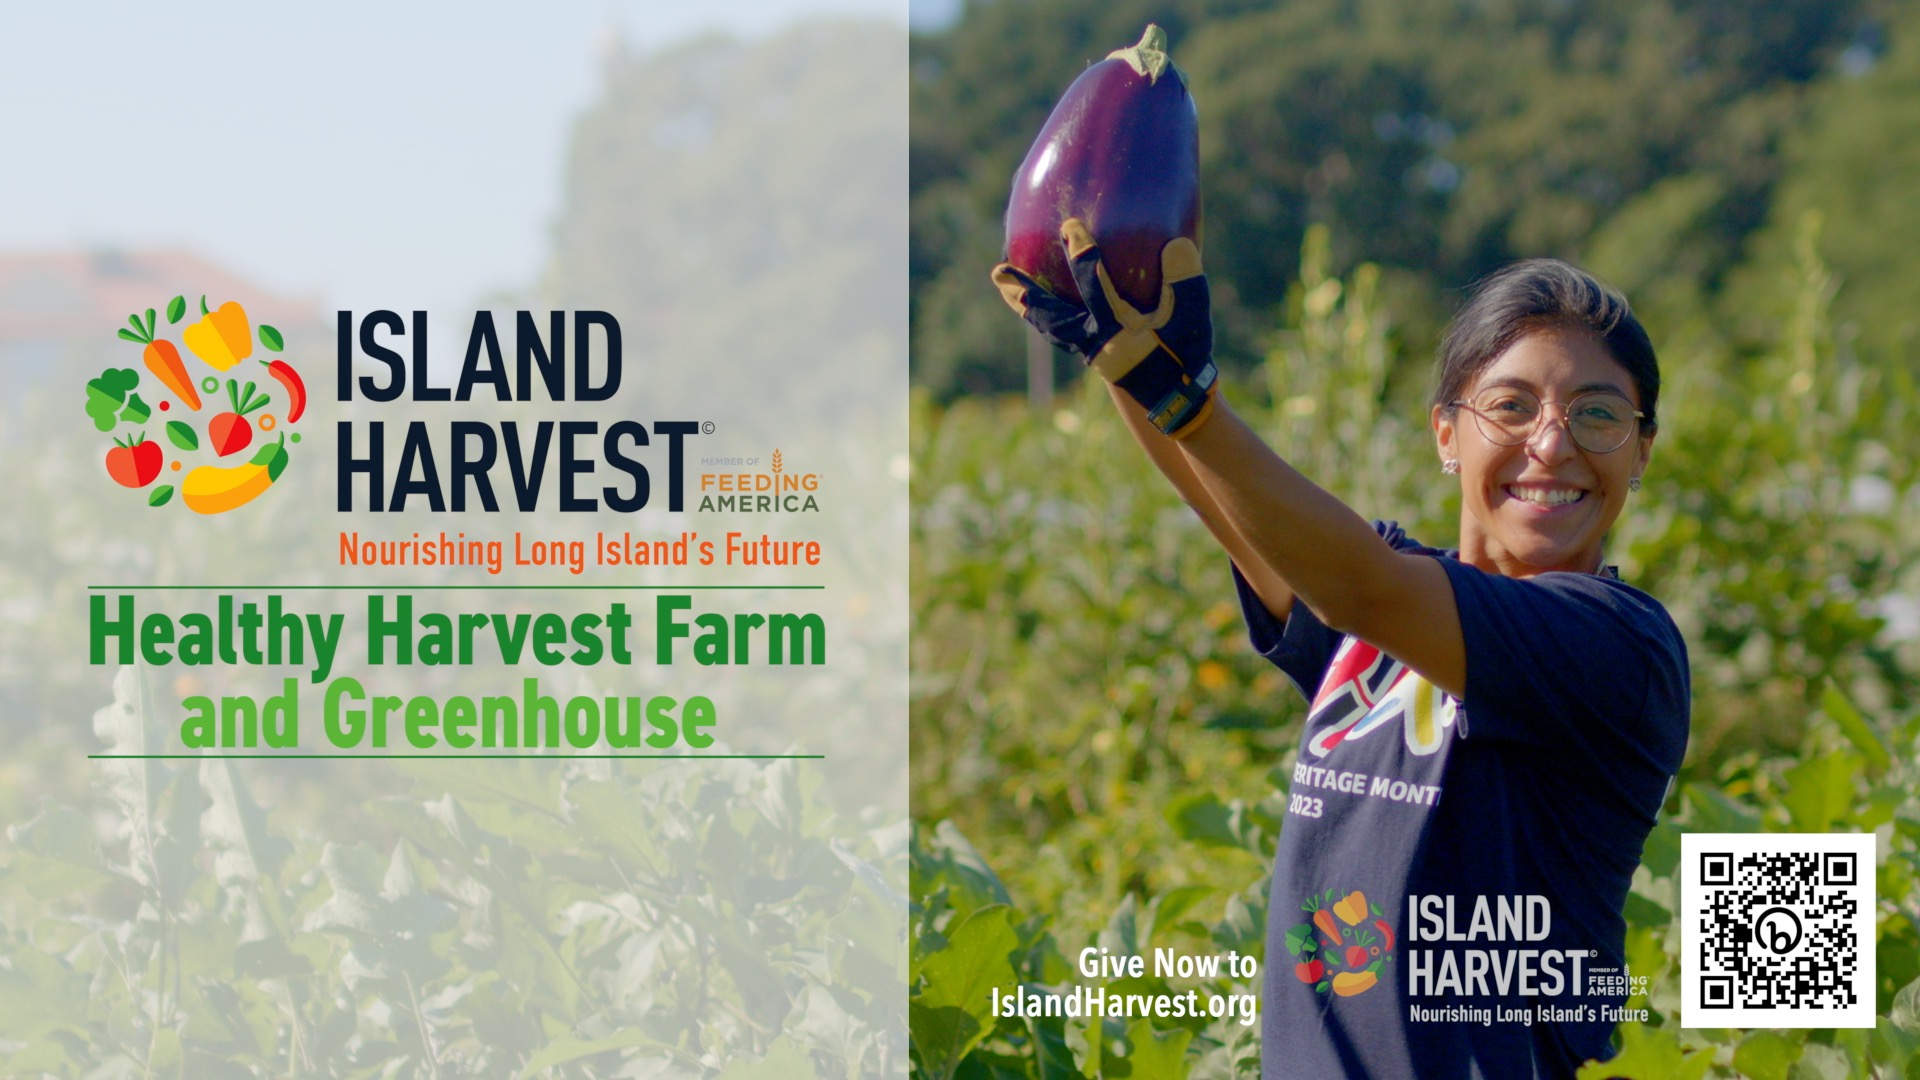 Islip.TV Gives Back with PSA for Island Harvest